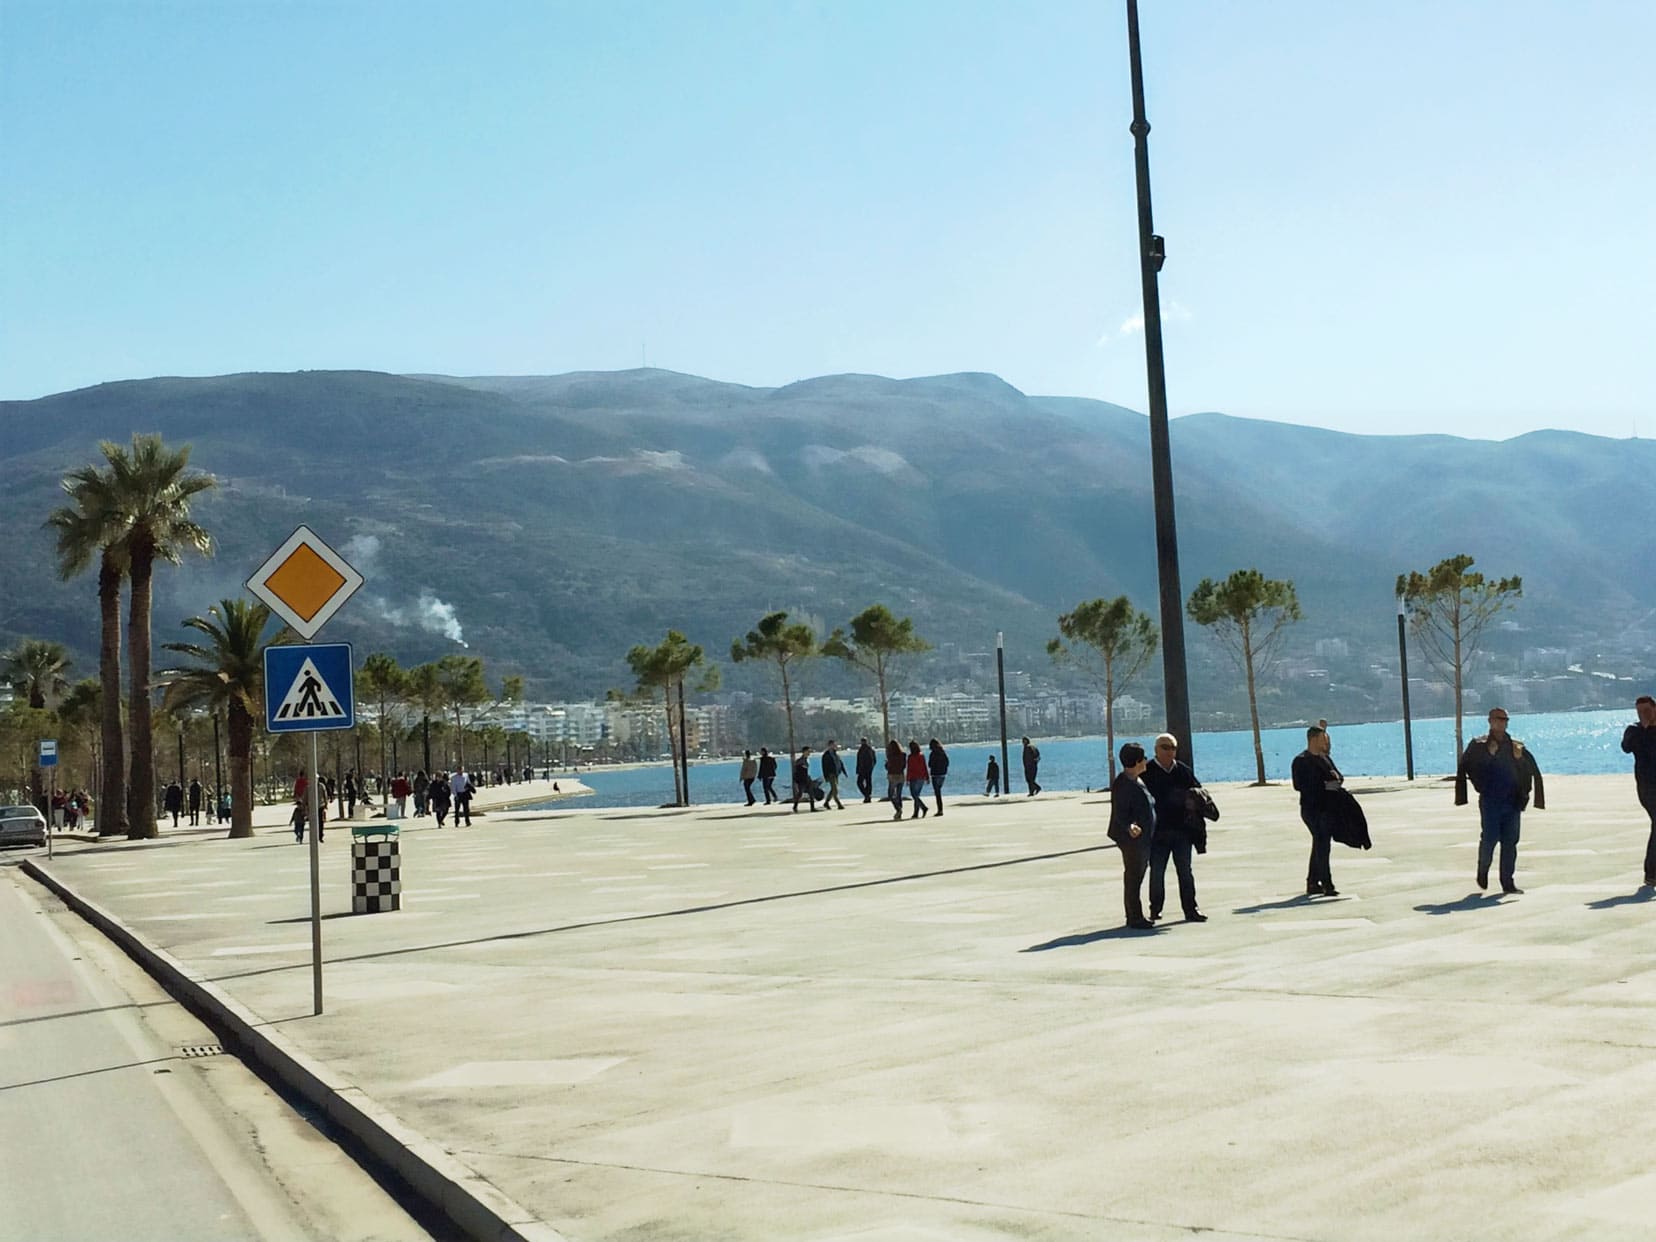 Pedestrianised wide paved area by the sea with people strolling